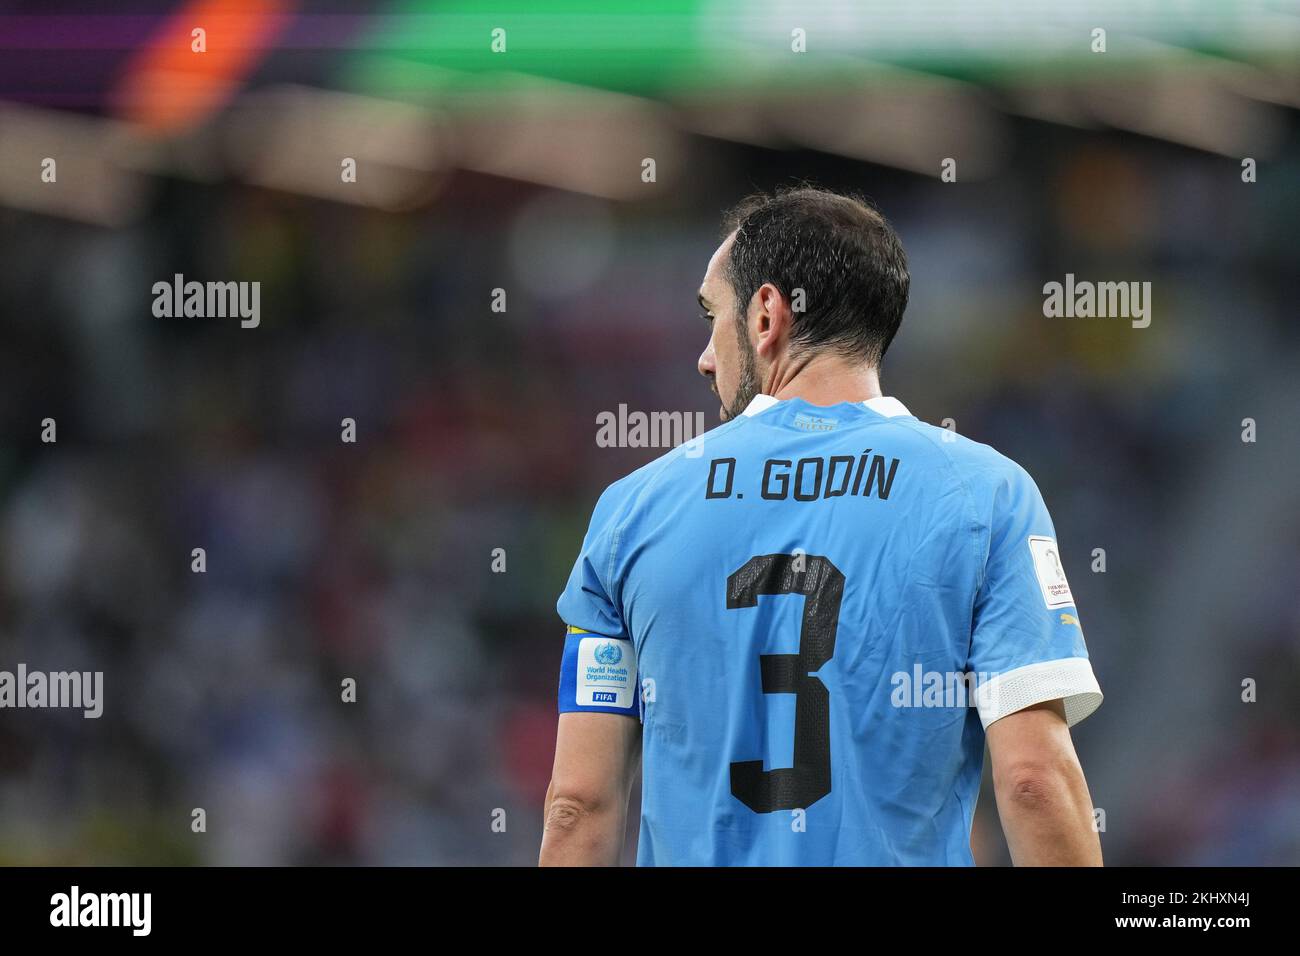 Rayan, Qatar. 23rd Nov, 2022. Diego Godin of Uruguay during the Qatar 2022 World Cup match, group H, date 1, between Uruguay and Korea Republic played at Education City Stadium on Nov 24, 2022 in Rayan, Qatar. (Photo by Bagu Blanco/PRESSINPHOTO) Credit: PRESSINPHOTO SPORTS AGENCY/Alamy Live News Stock Photo